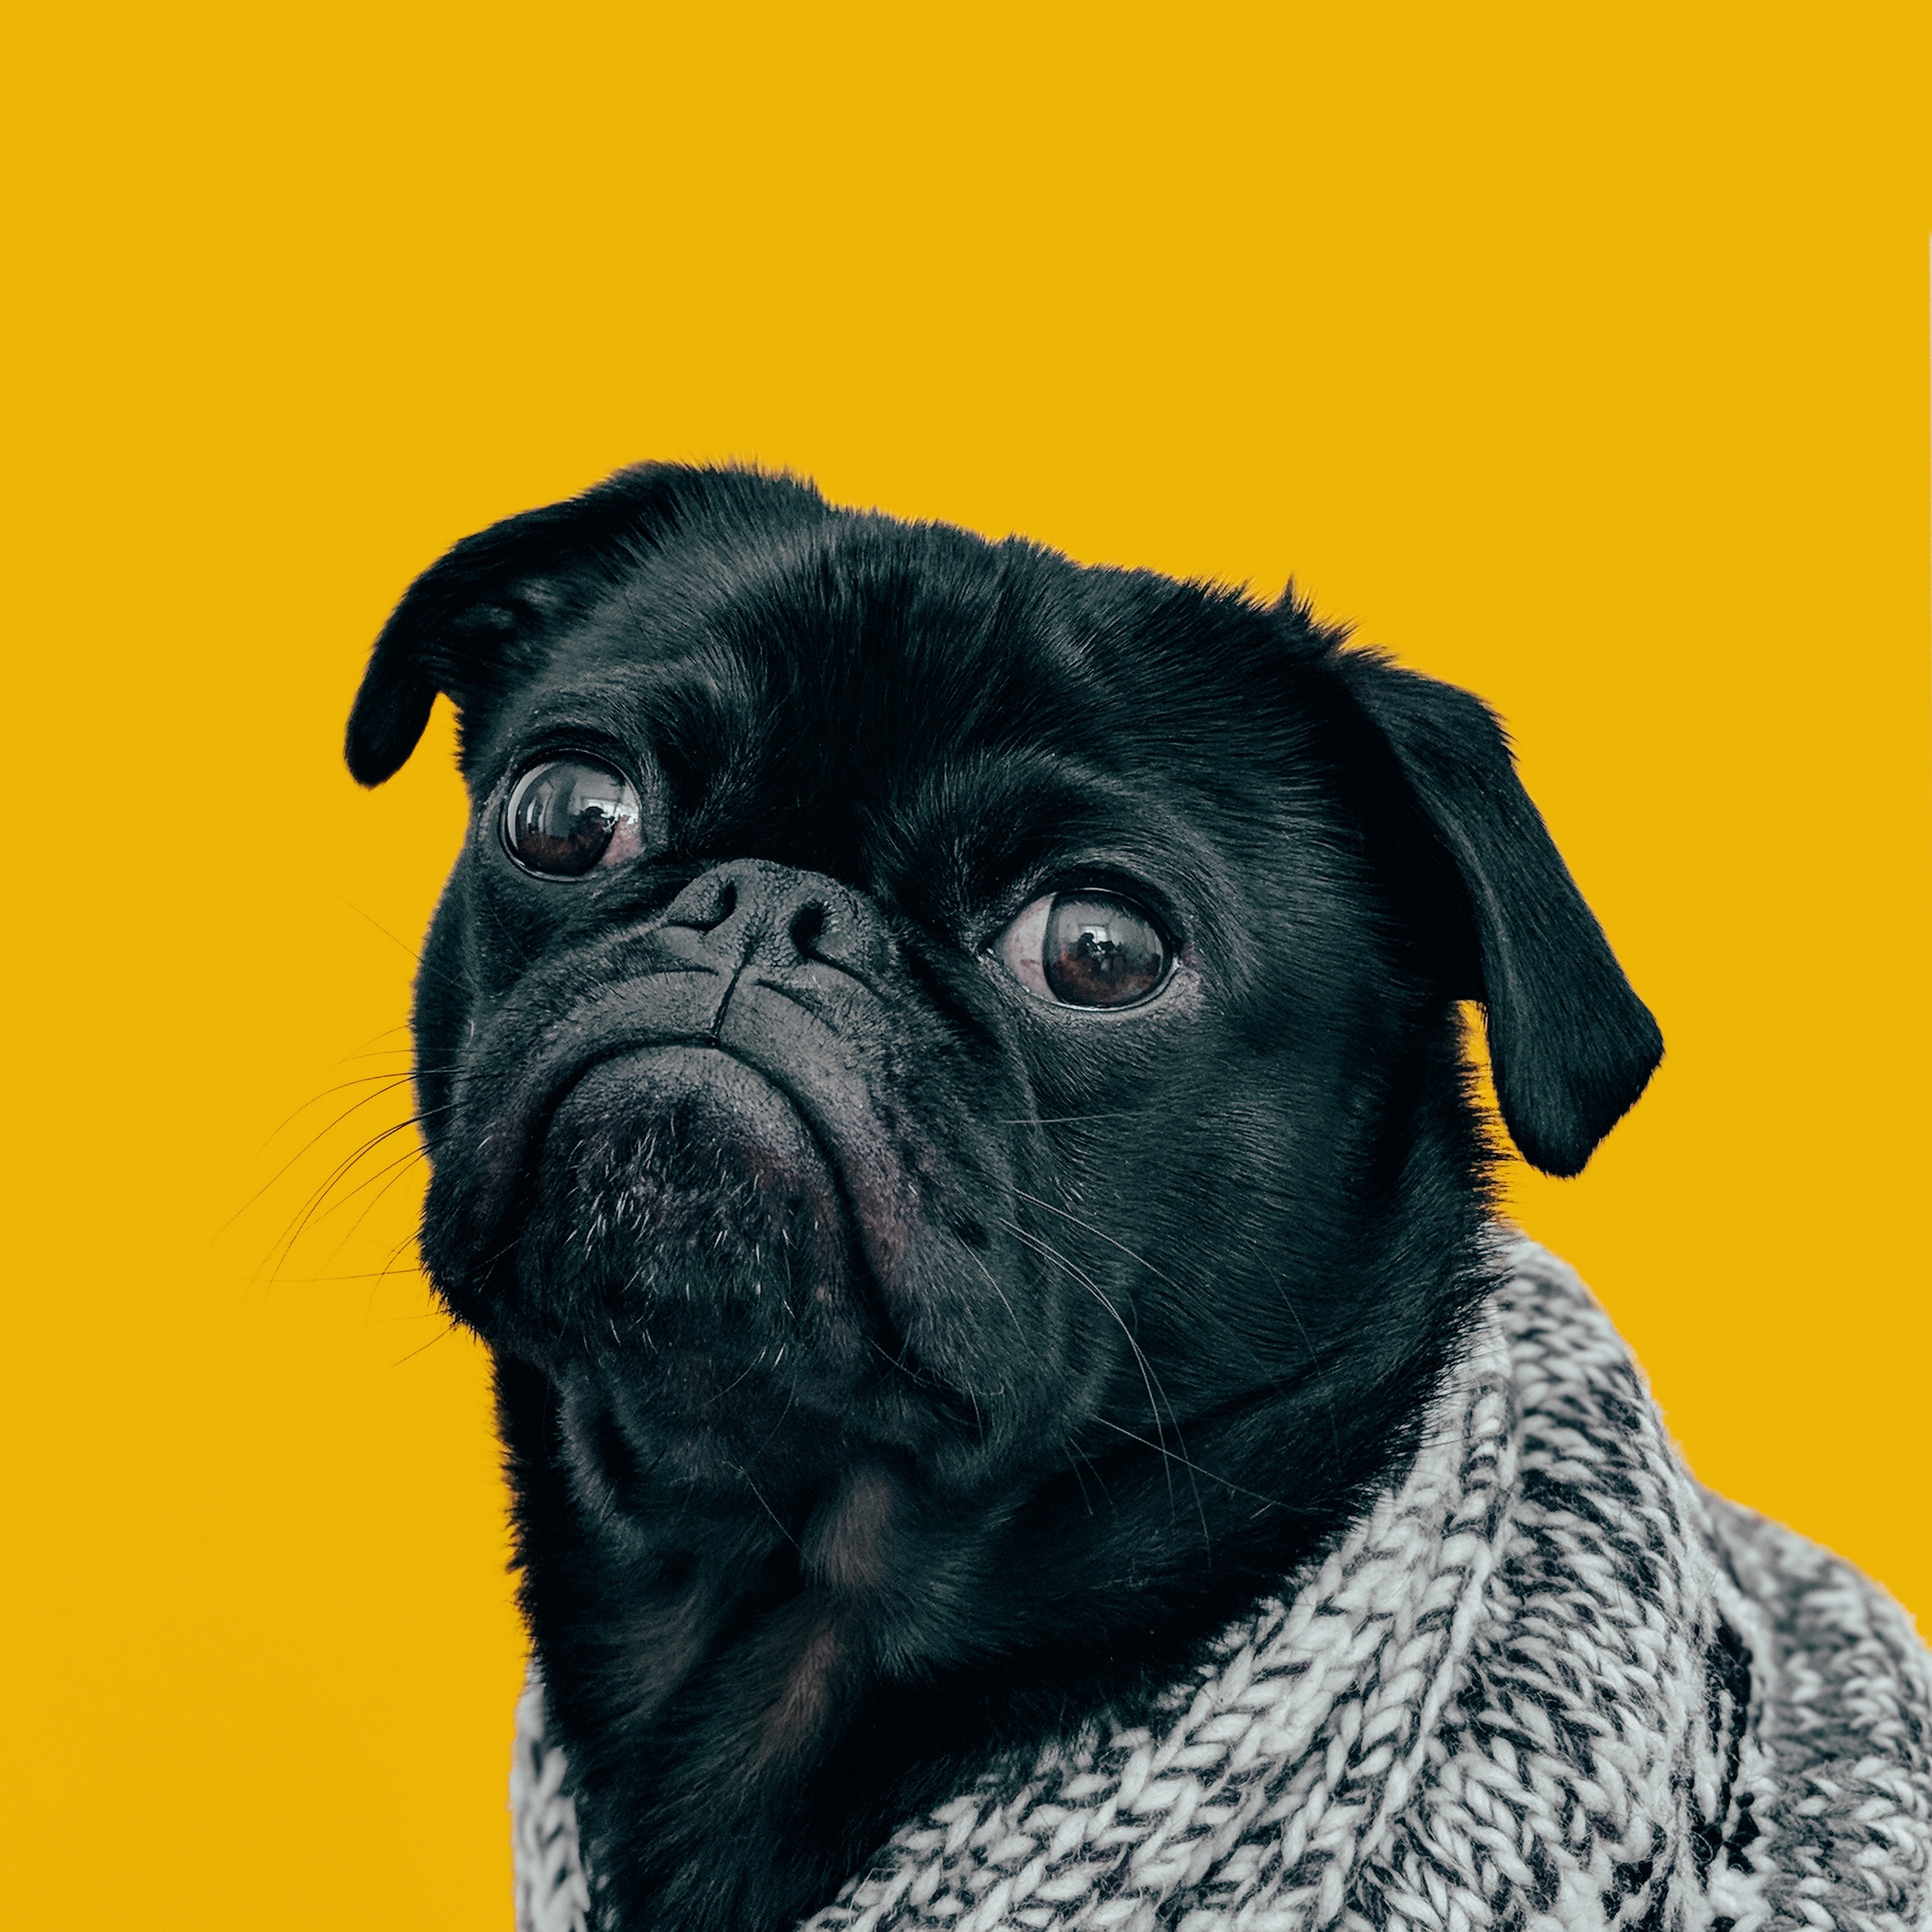 Wallpaper Pug, Dog, Muzzle, Look, Scarf - Black Pug With Yellow Background - HD Wallpaper 